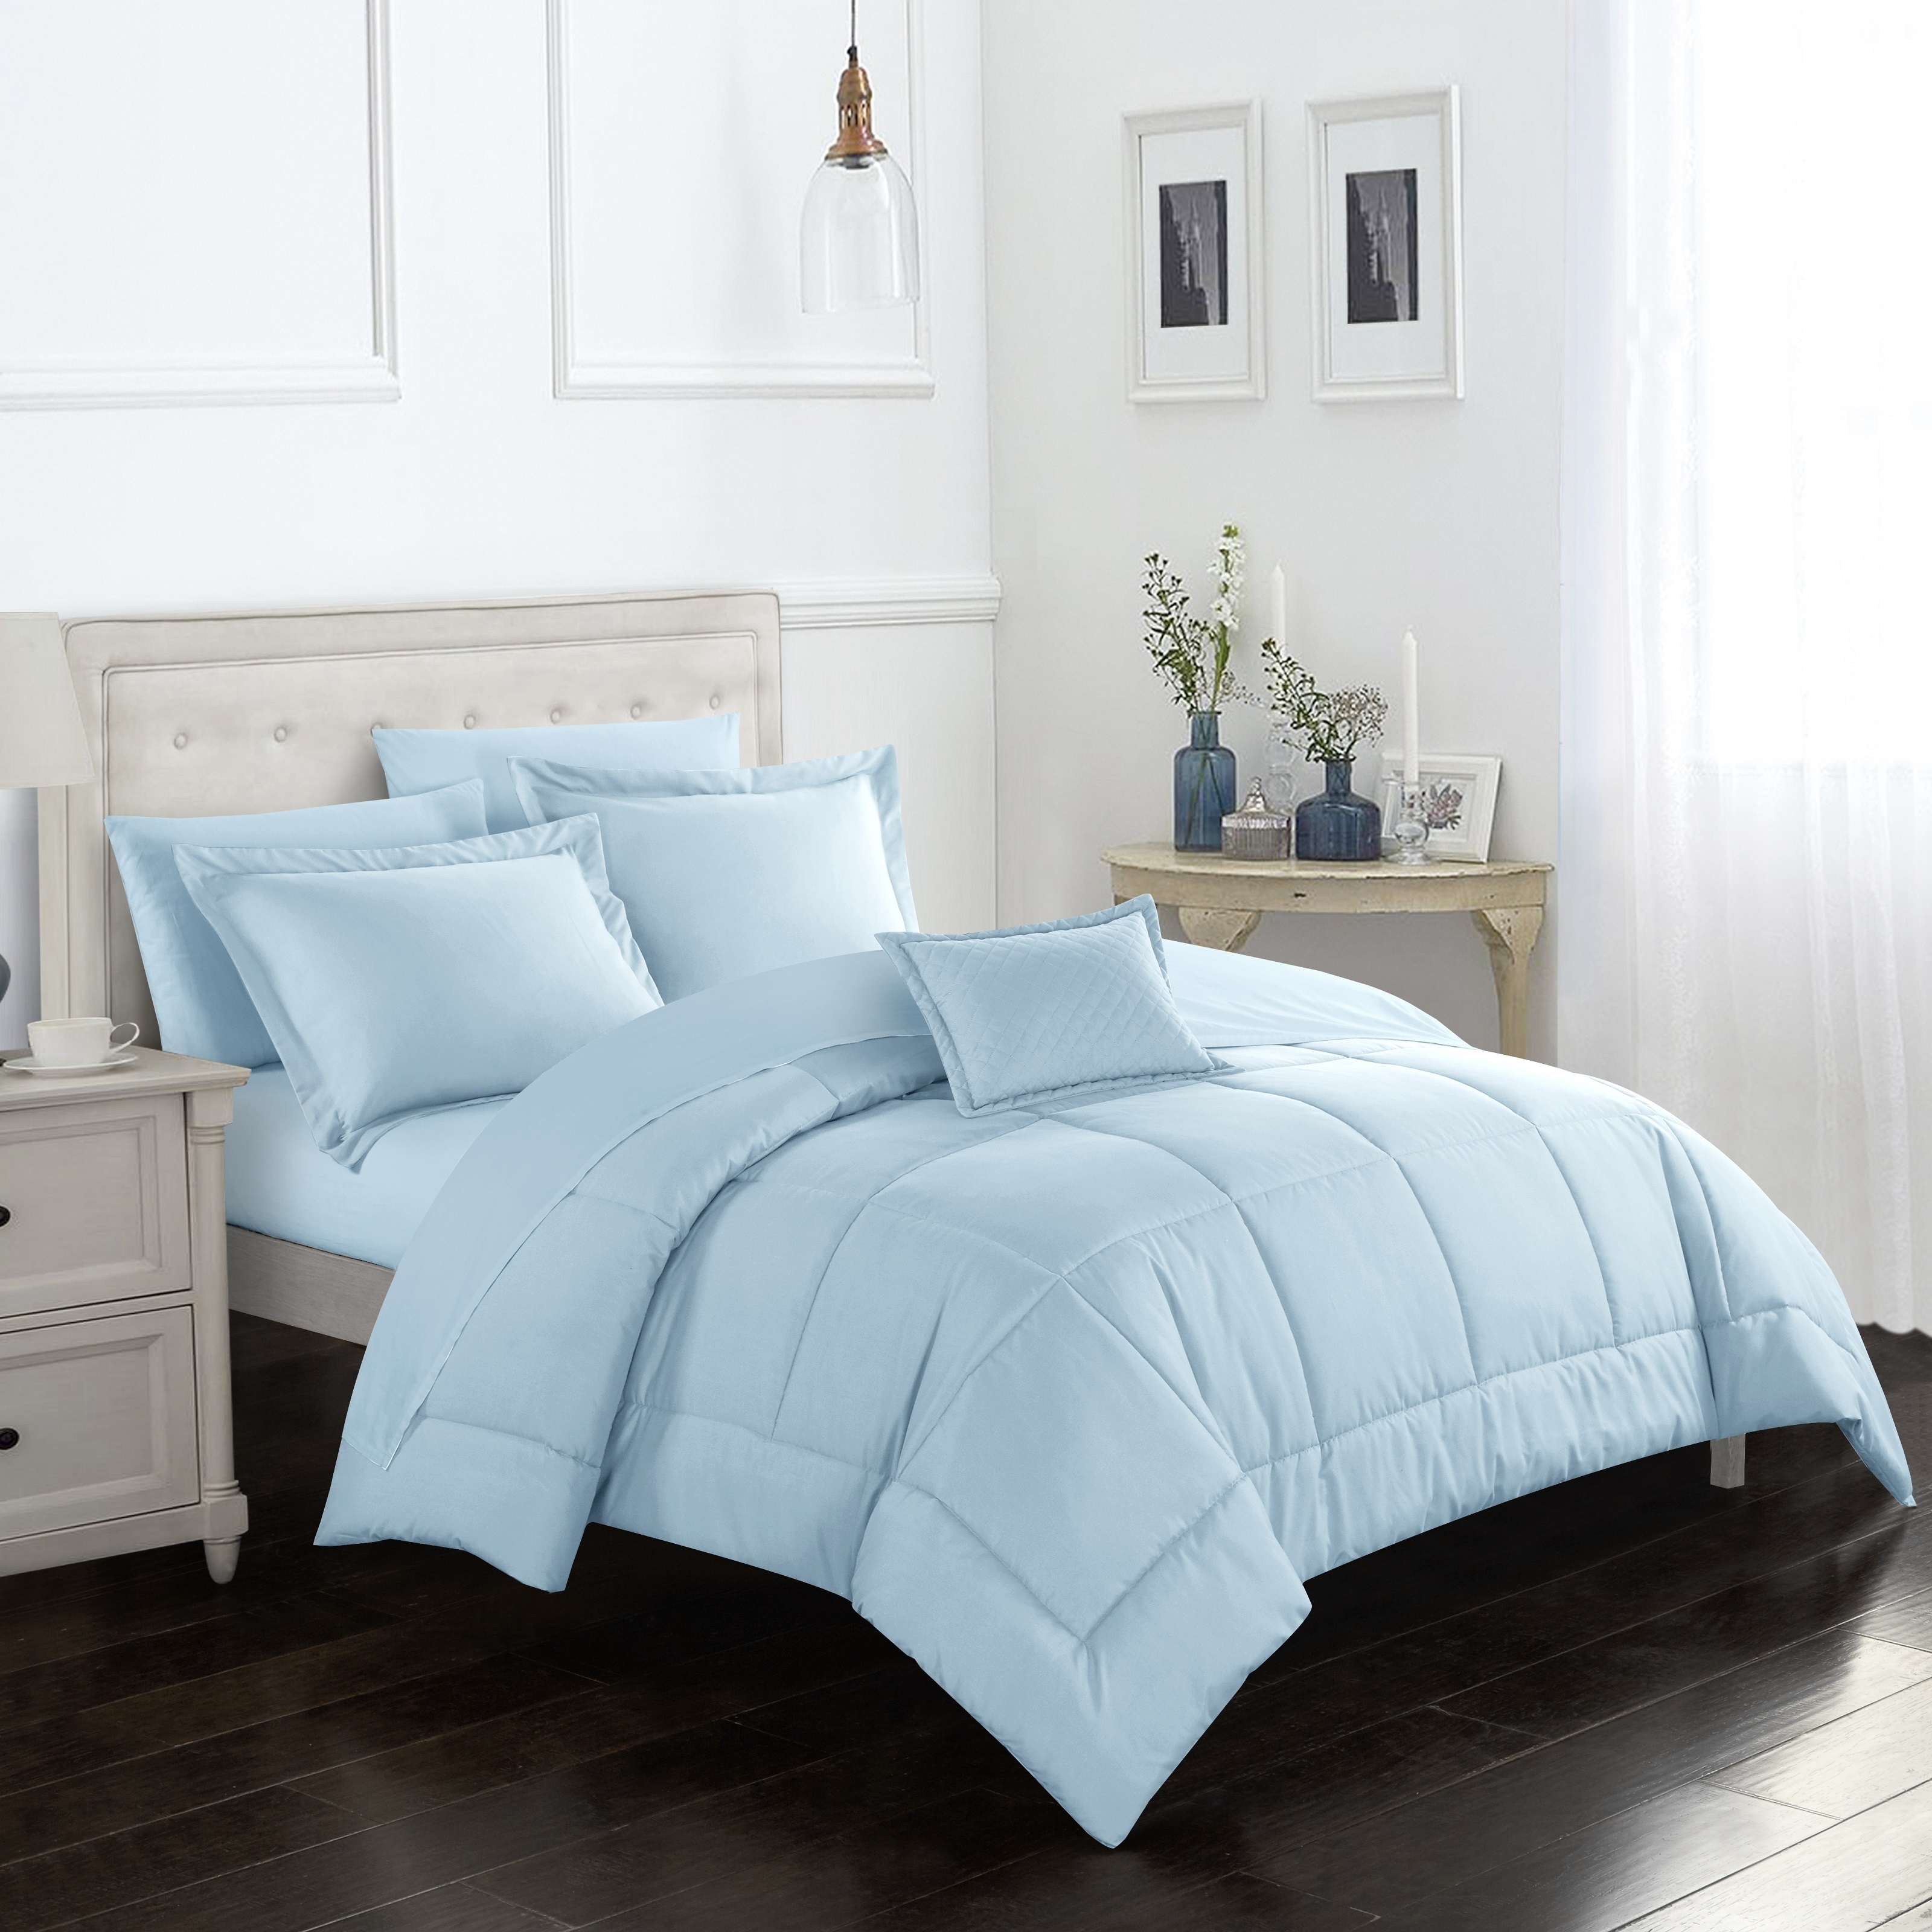 Joshuah 8 Or 6 Piece Comforter Set Pieced Solid Color Stitched With Sheet Set - Blue, King